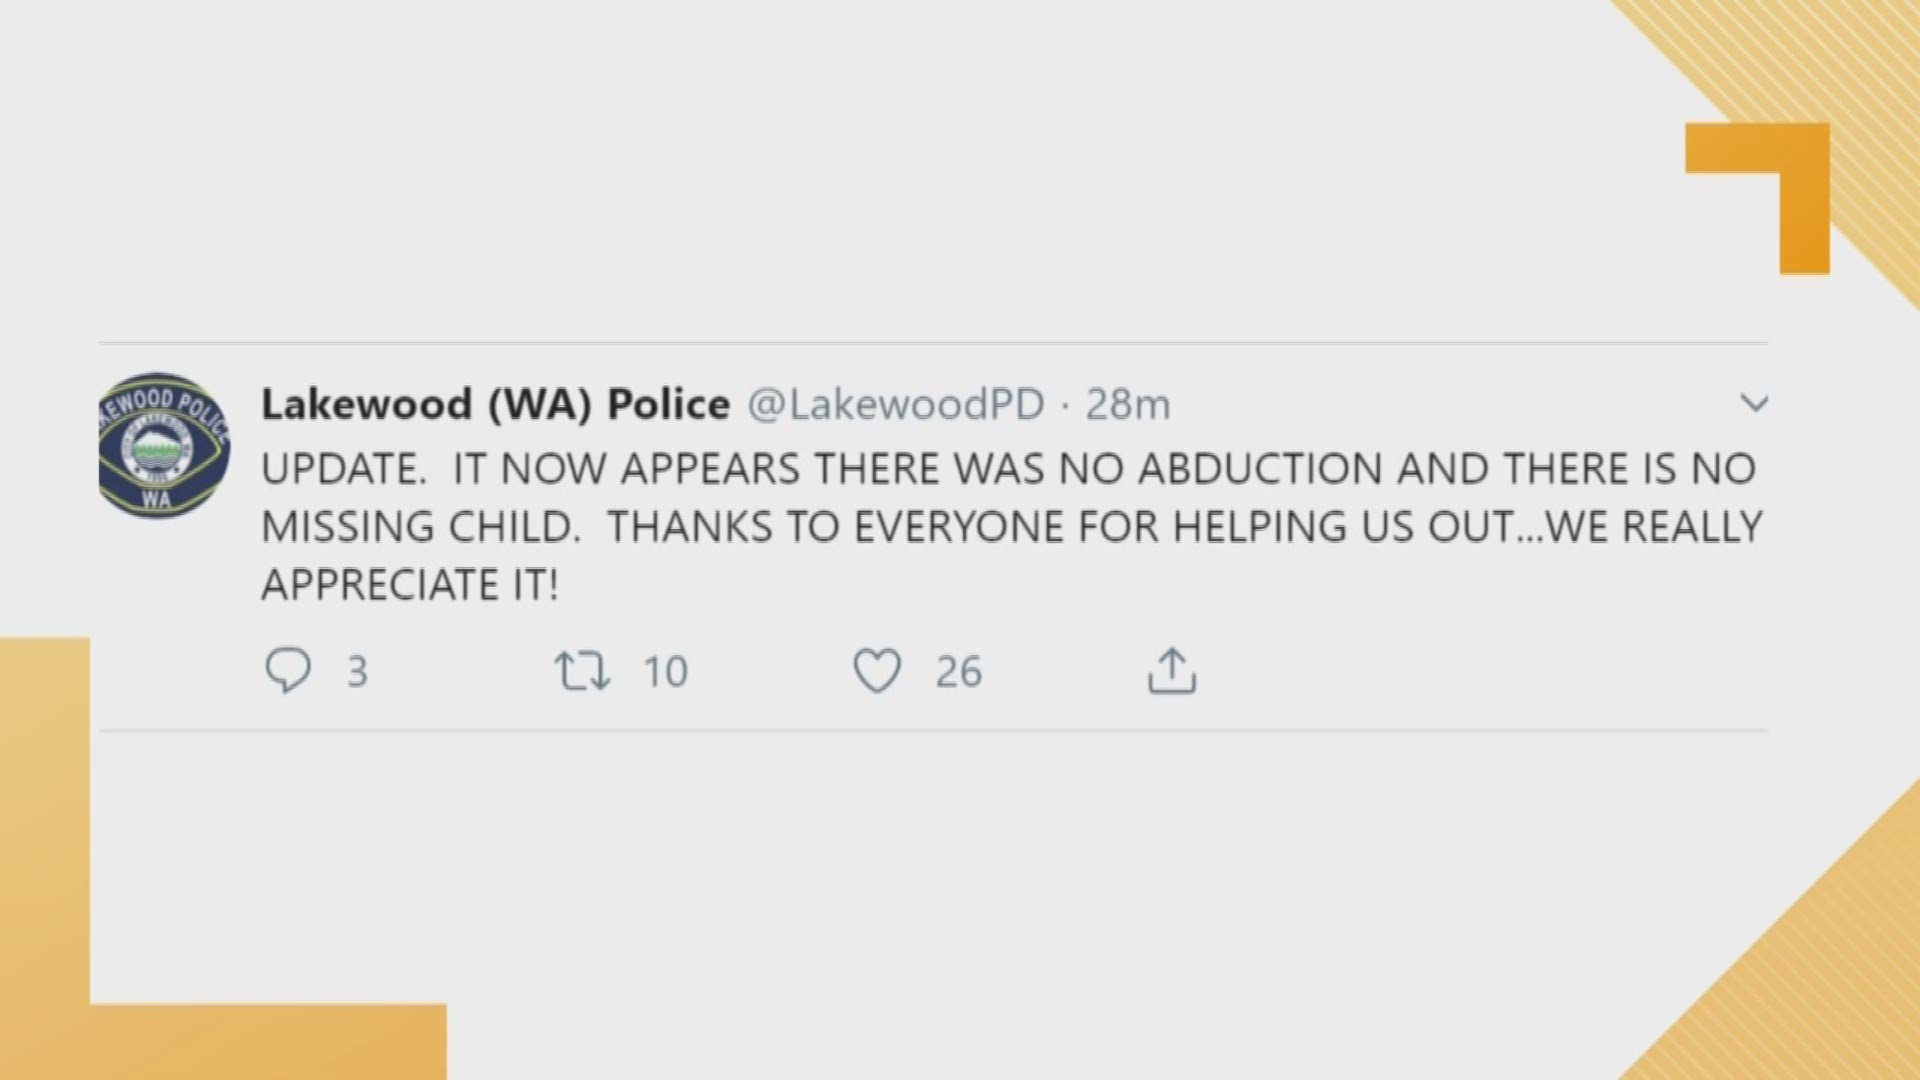 Lakewood police say no child was abducted following a report of suspicious activity Monday evening.